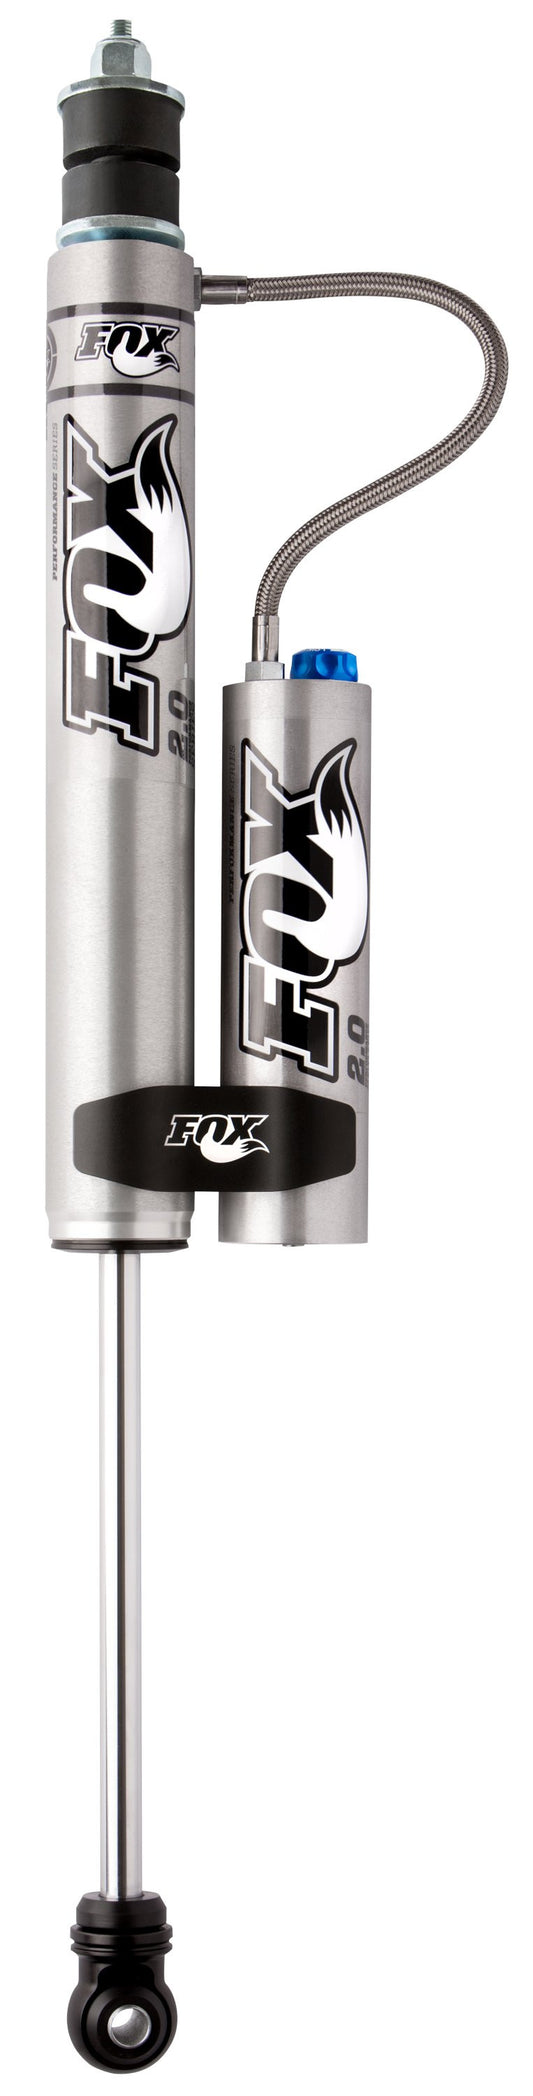 PERFORMANCE SERIES 2.0 SMOOTH BODY RESERVOIR SHOCK - ADJUSTABLE Lift: 4-6 2005-2016 Ford F-250 Super Duty FOX-985-26-106 - 2.0 SHOCK - FOX Offroad Shocks - Texas Complete Truck Center